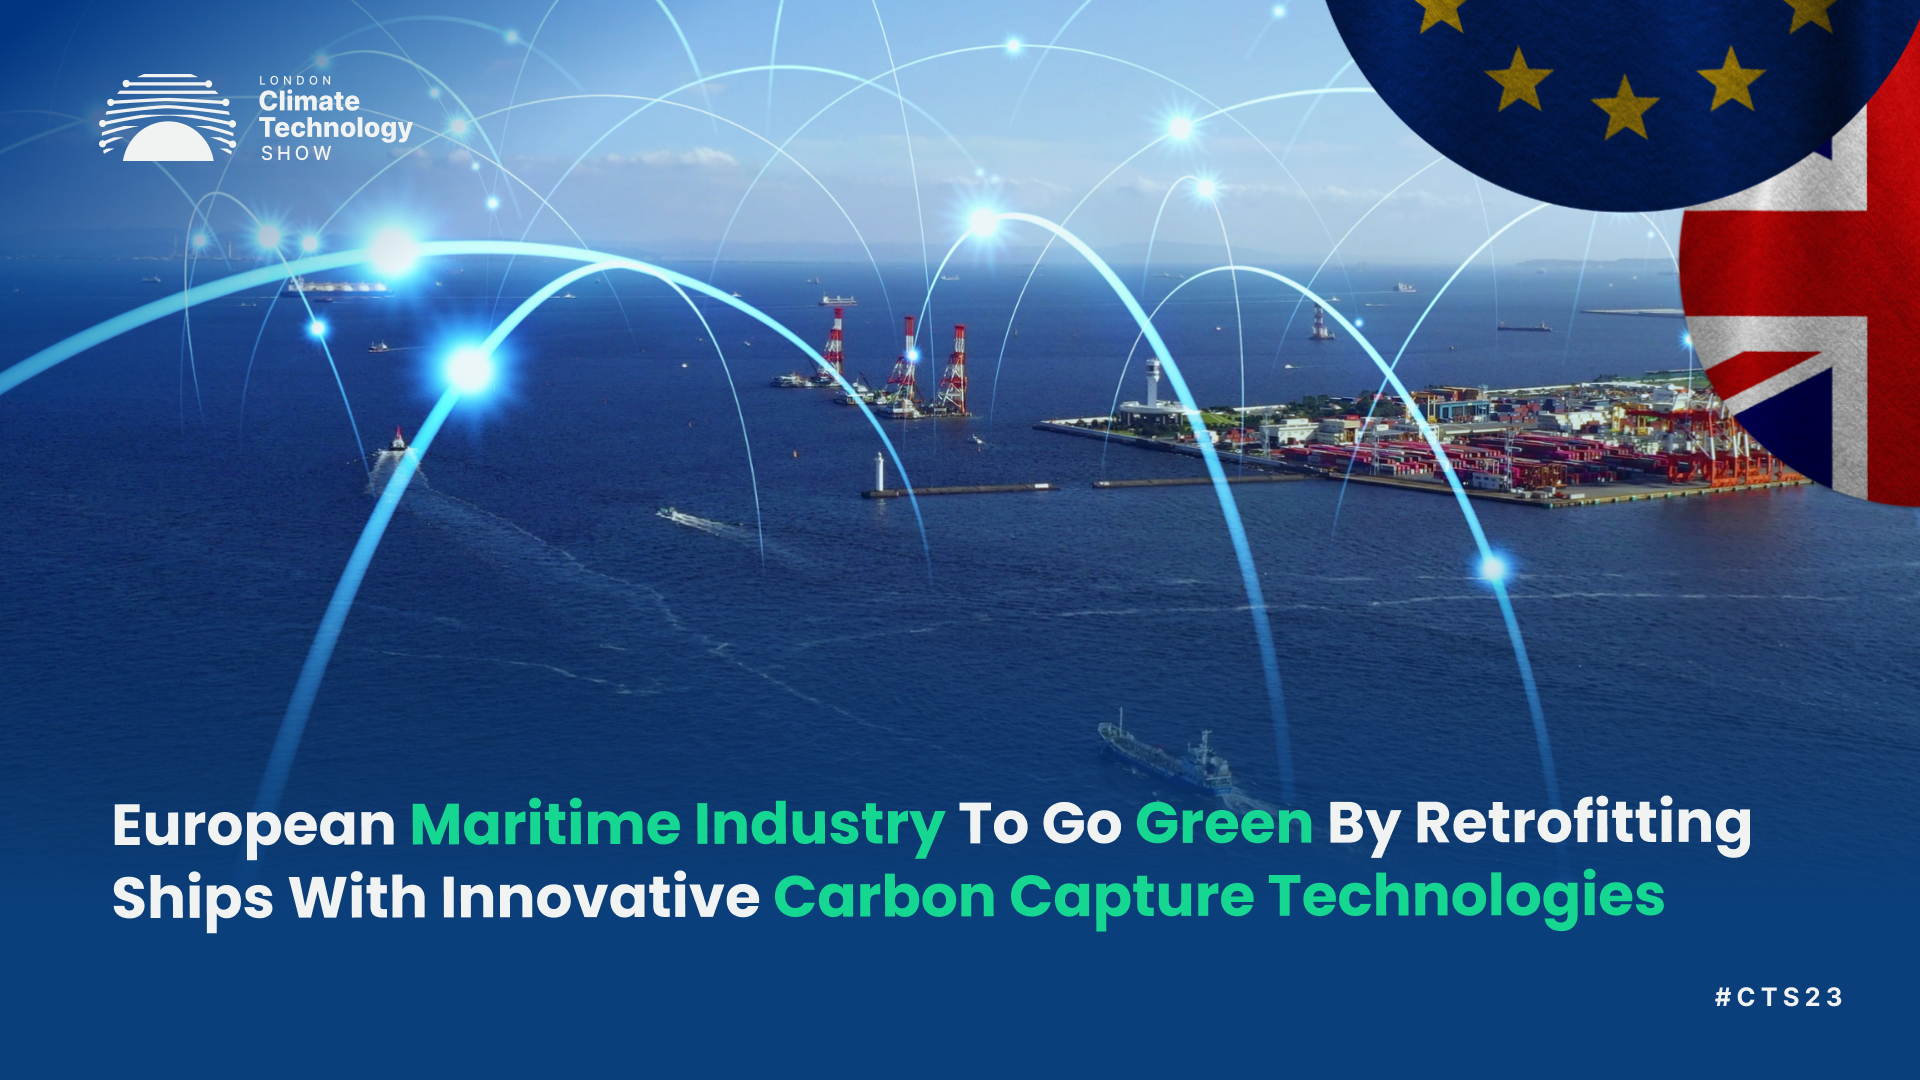 European Maritime Industry To Go Green By Retrofitting Ships With Innovative Carbon Capture Technologies